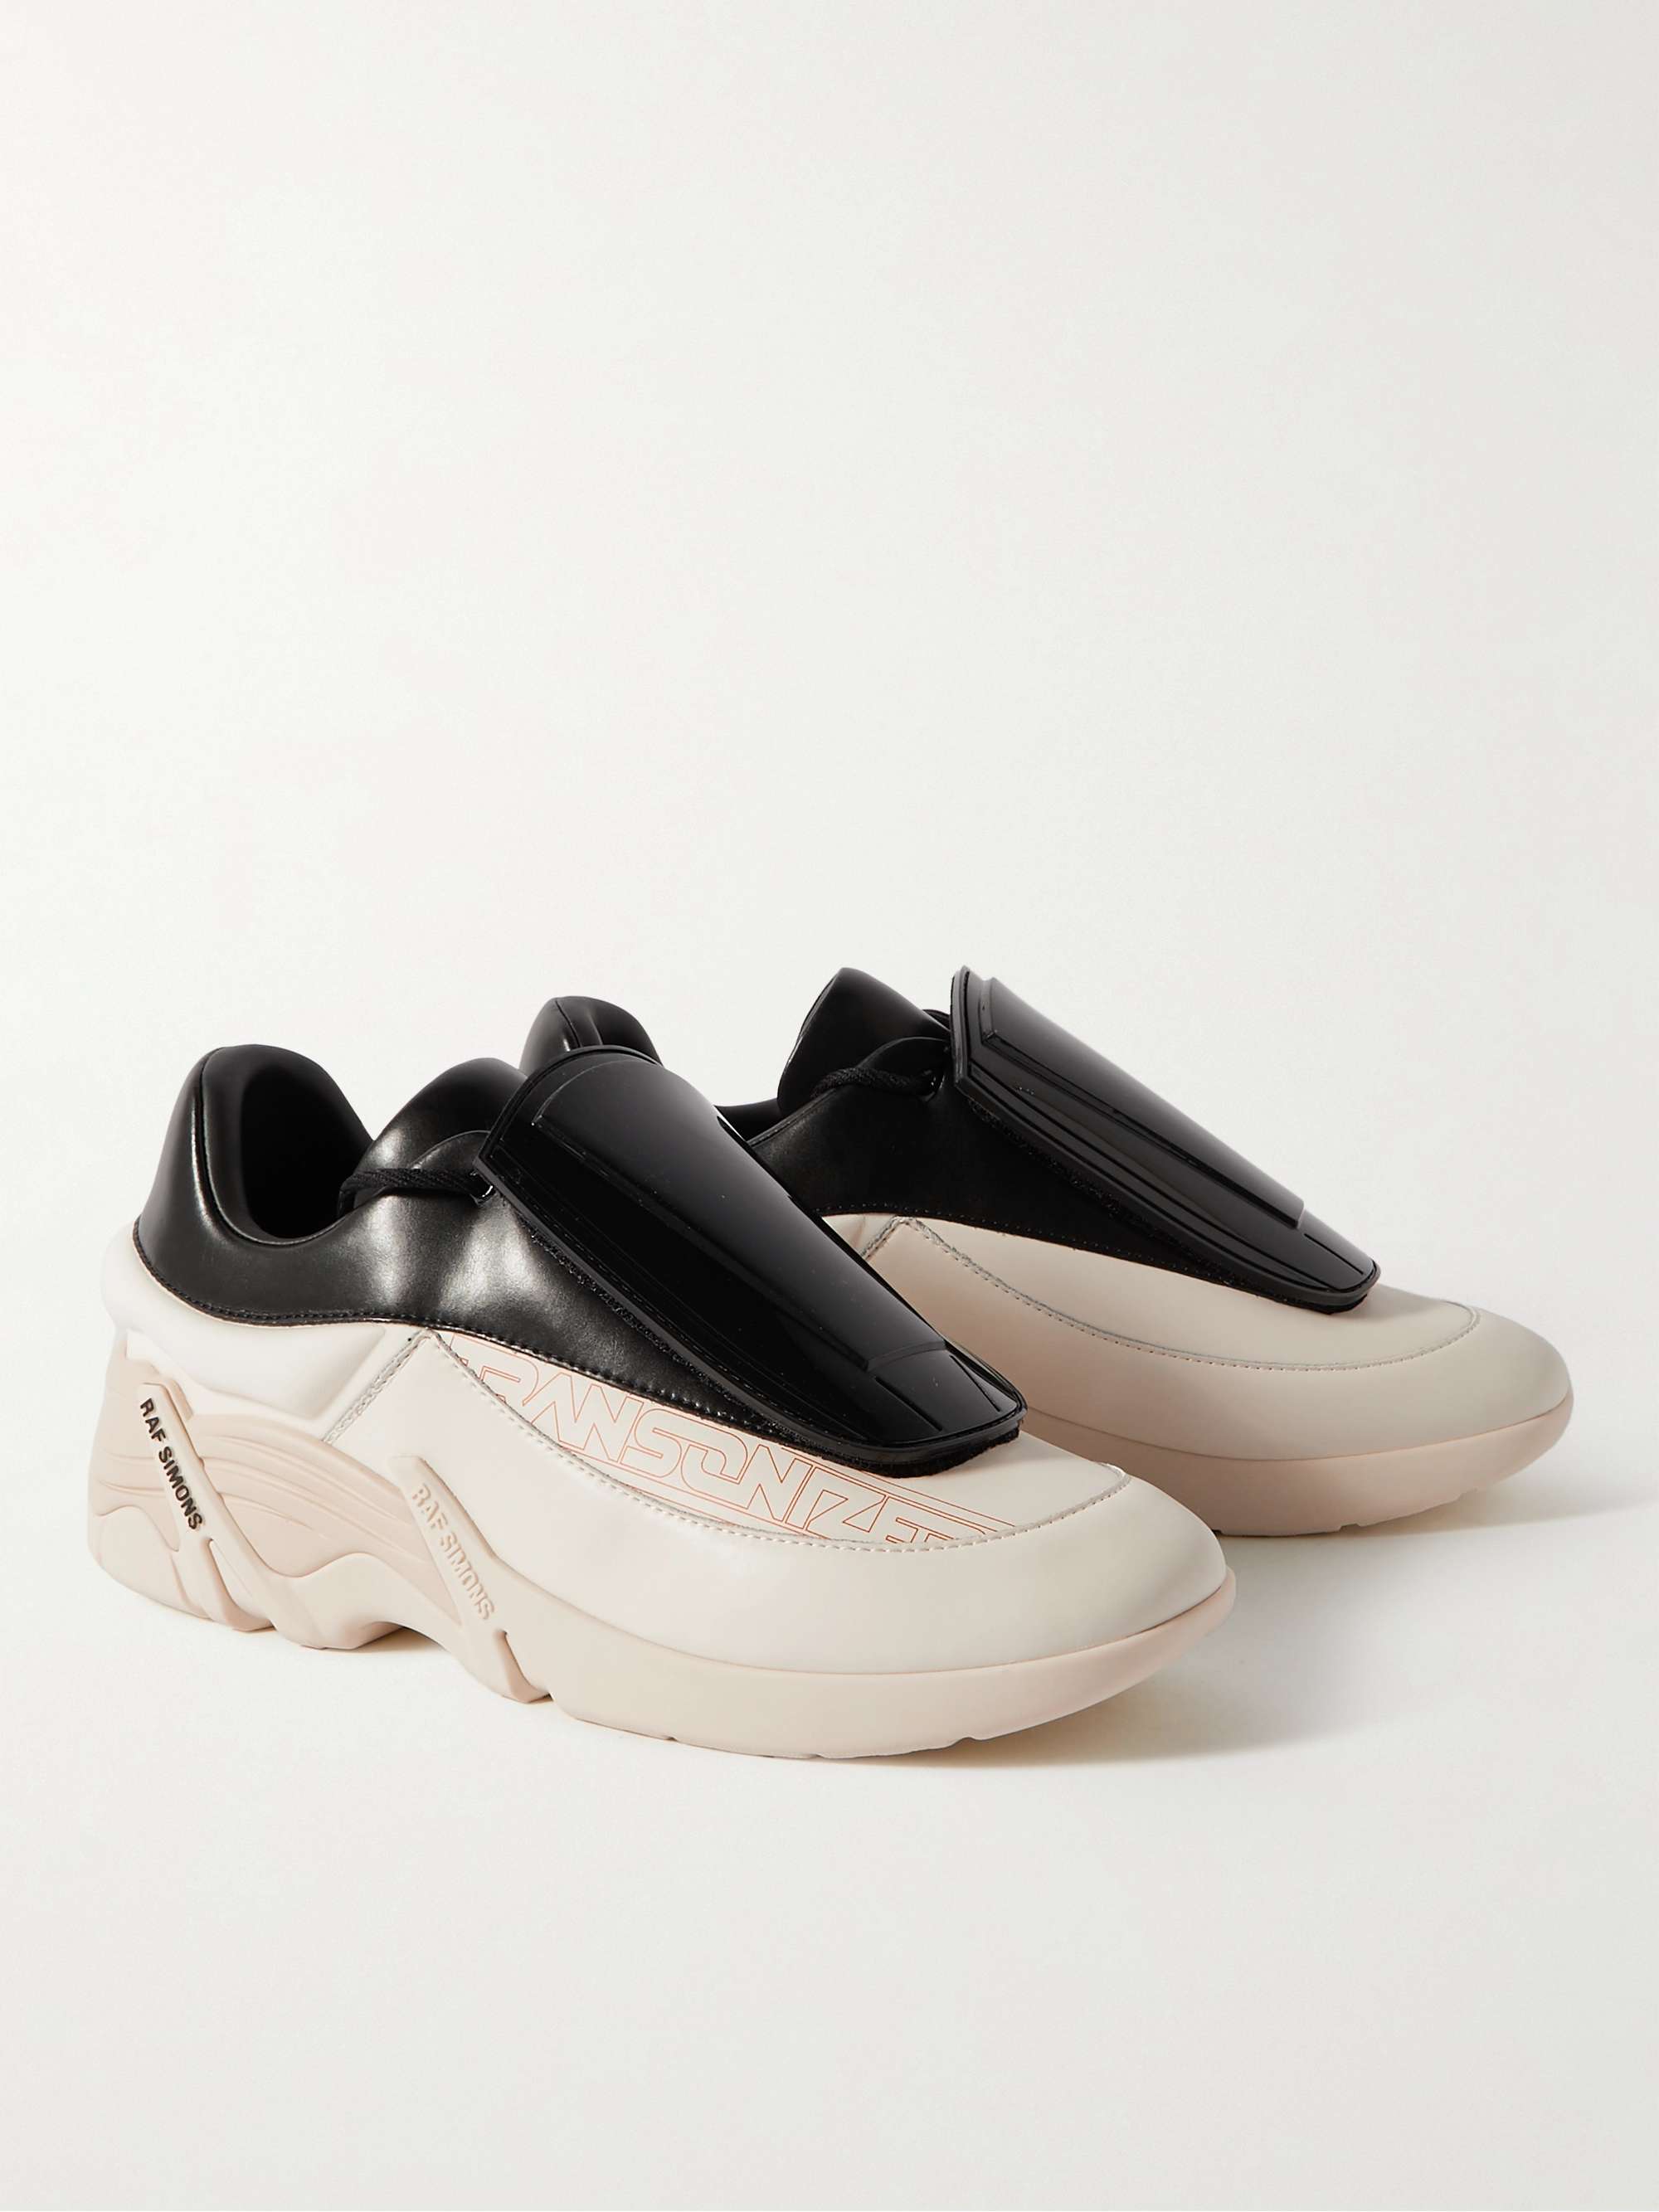 RAF SIMONS Antei Shell and PVC-Trimmed Leather Sneakers for Men | MR PORTER